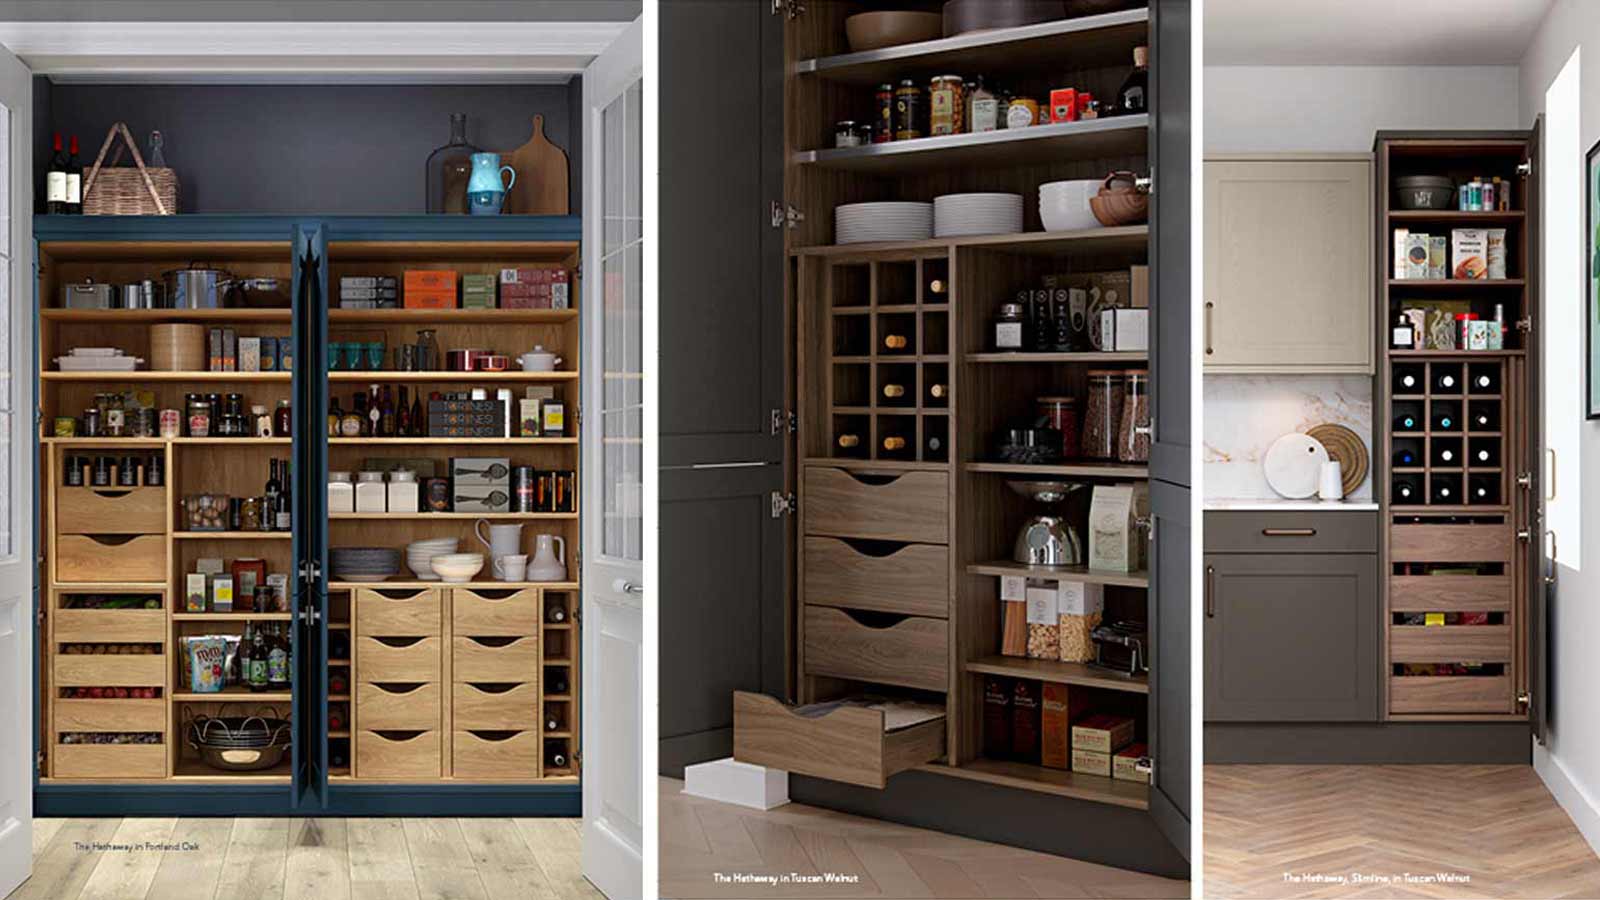 Kitchen storage cabinets with pantries with shelves and pantry doors